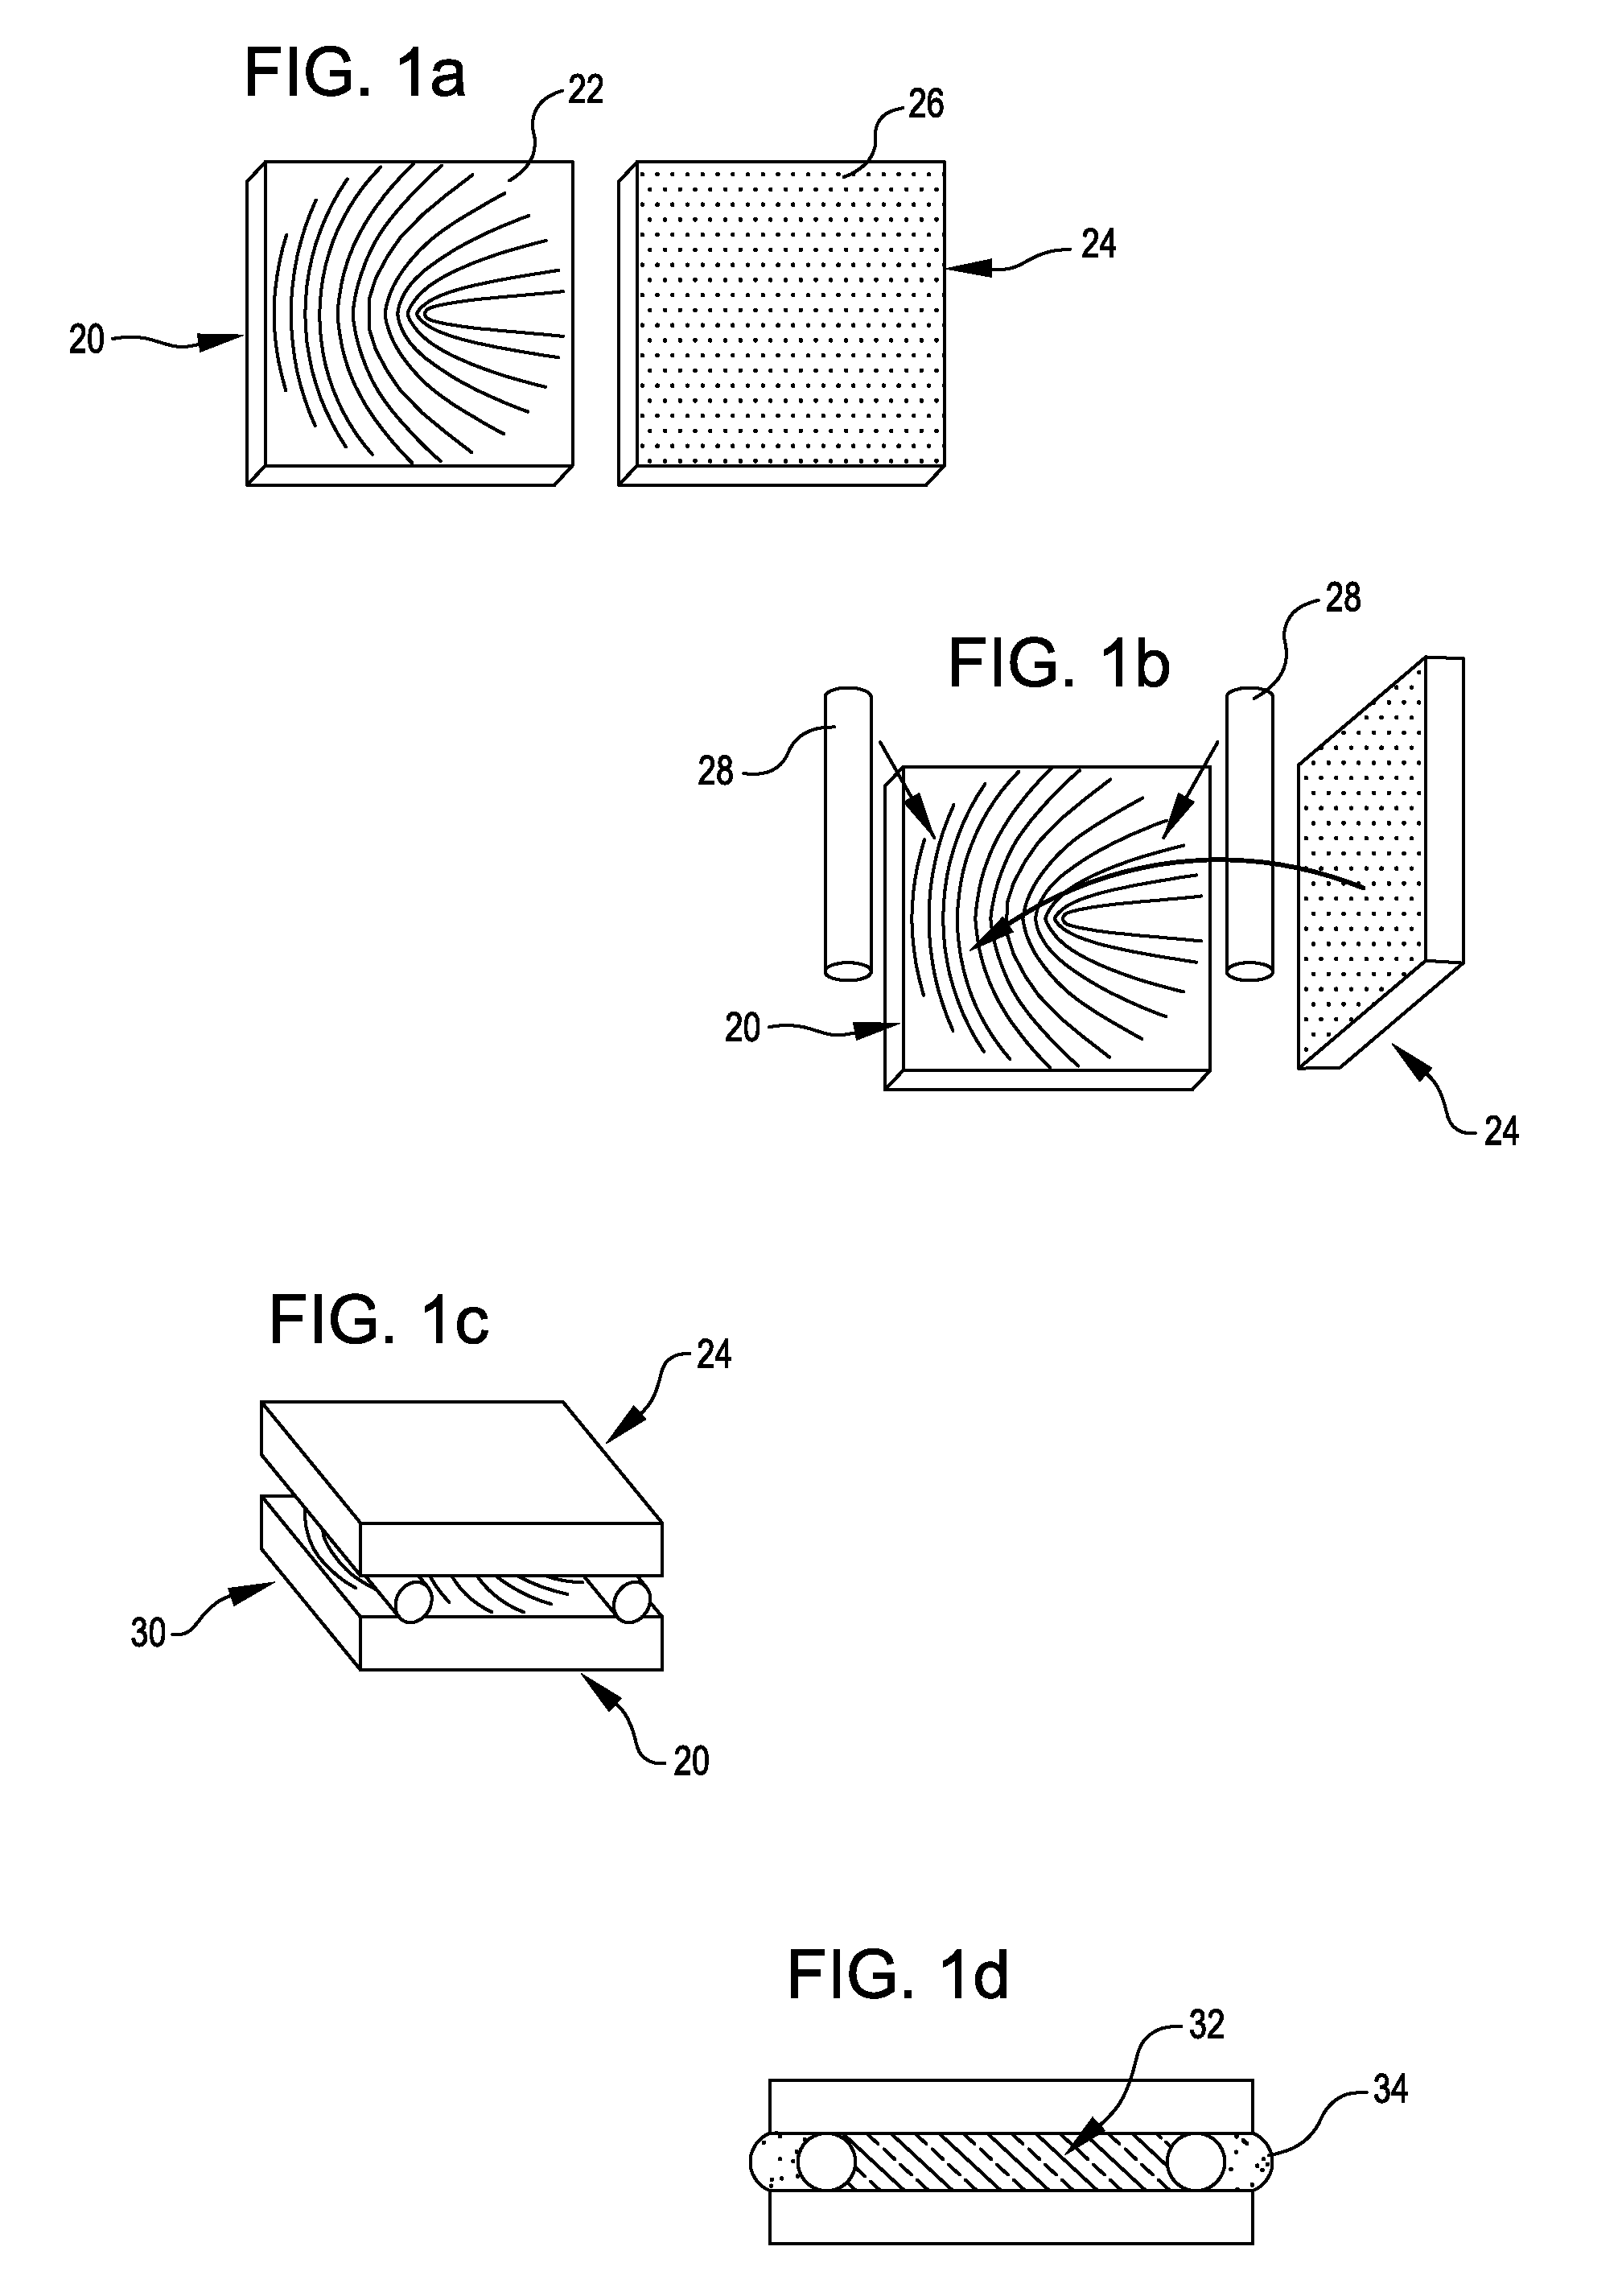 Liquid crystal geometrical phase optical elements and a system for generating and rapidly switching helical modes of an electromagnetic wave, based on these optical elements